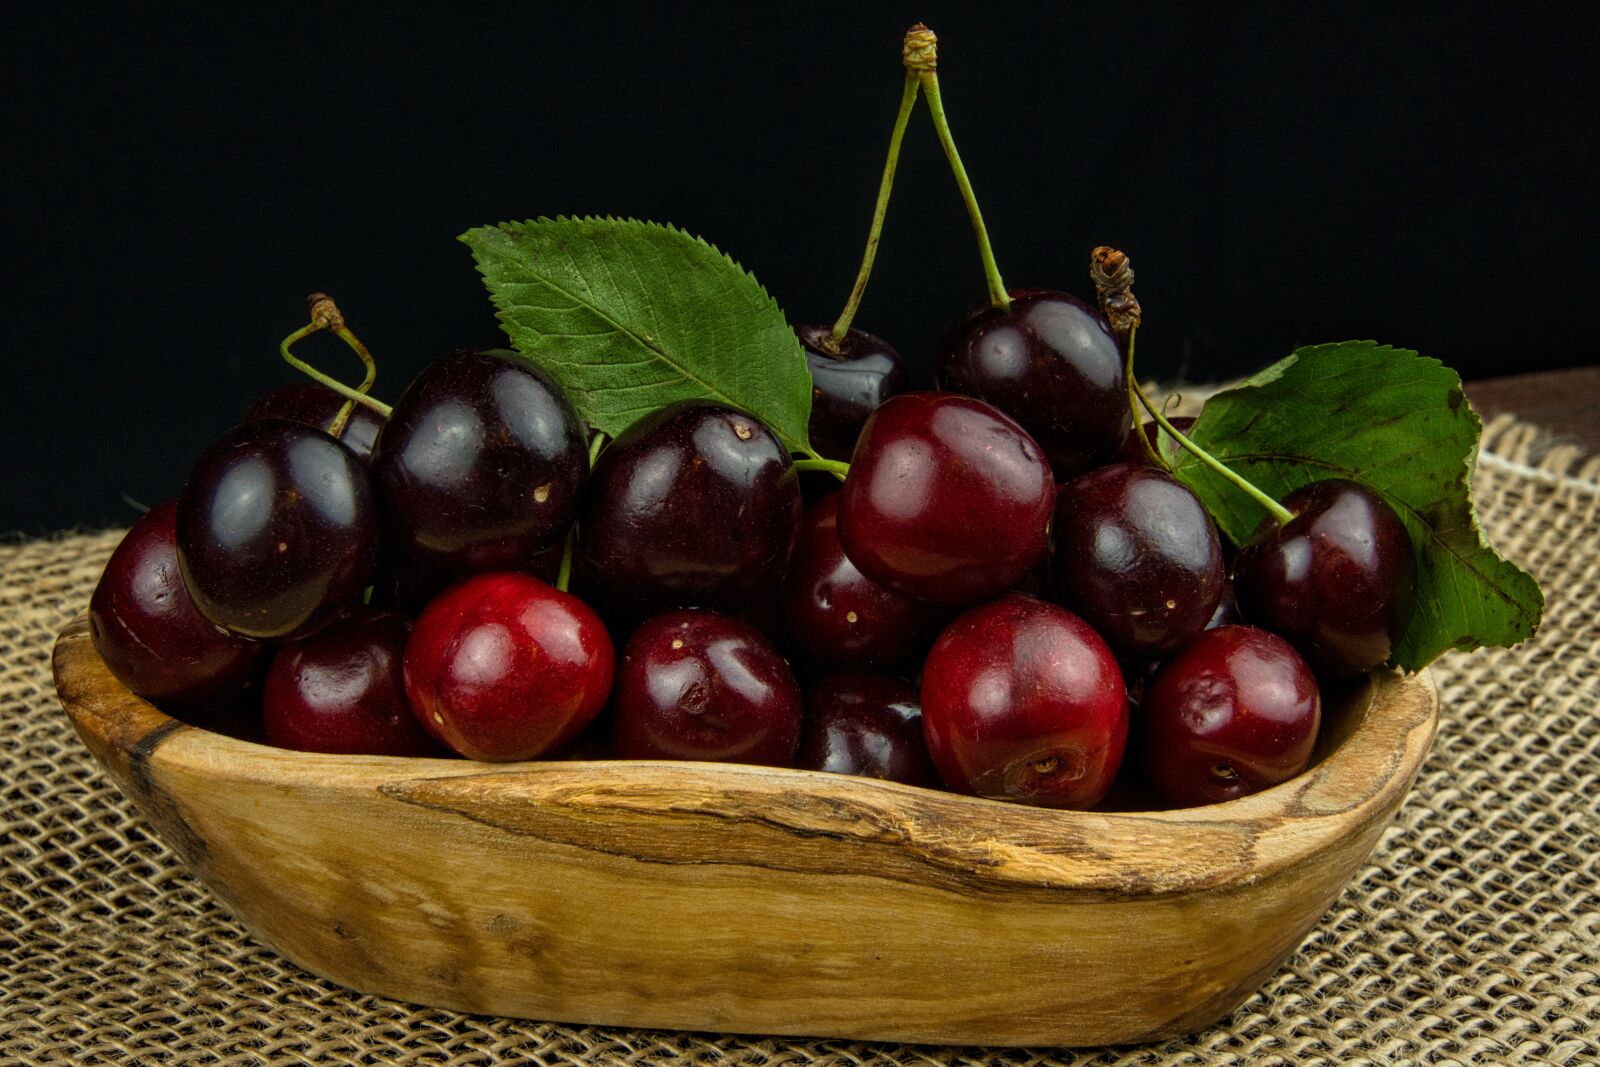 Sony a6400 sample photo. Cherries, fruit, nature photography